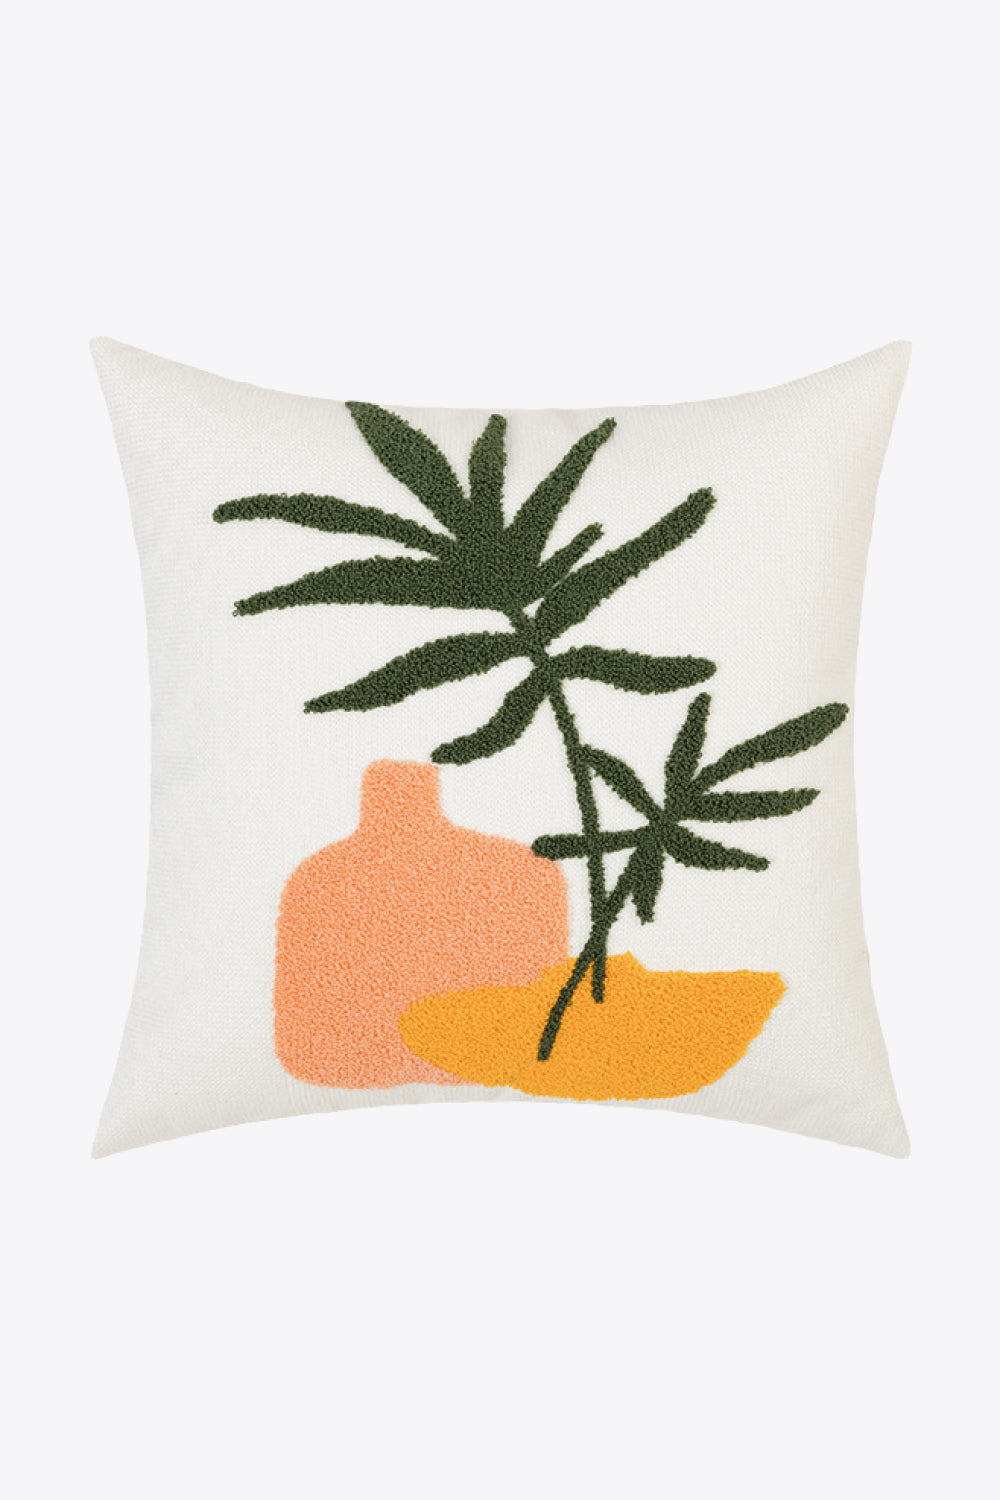 Punch-Needle Decorative Throw Pillow Covers